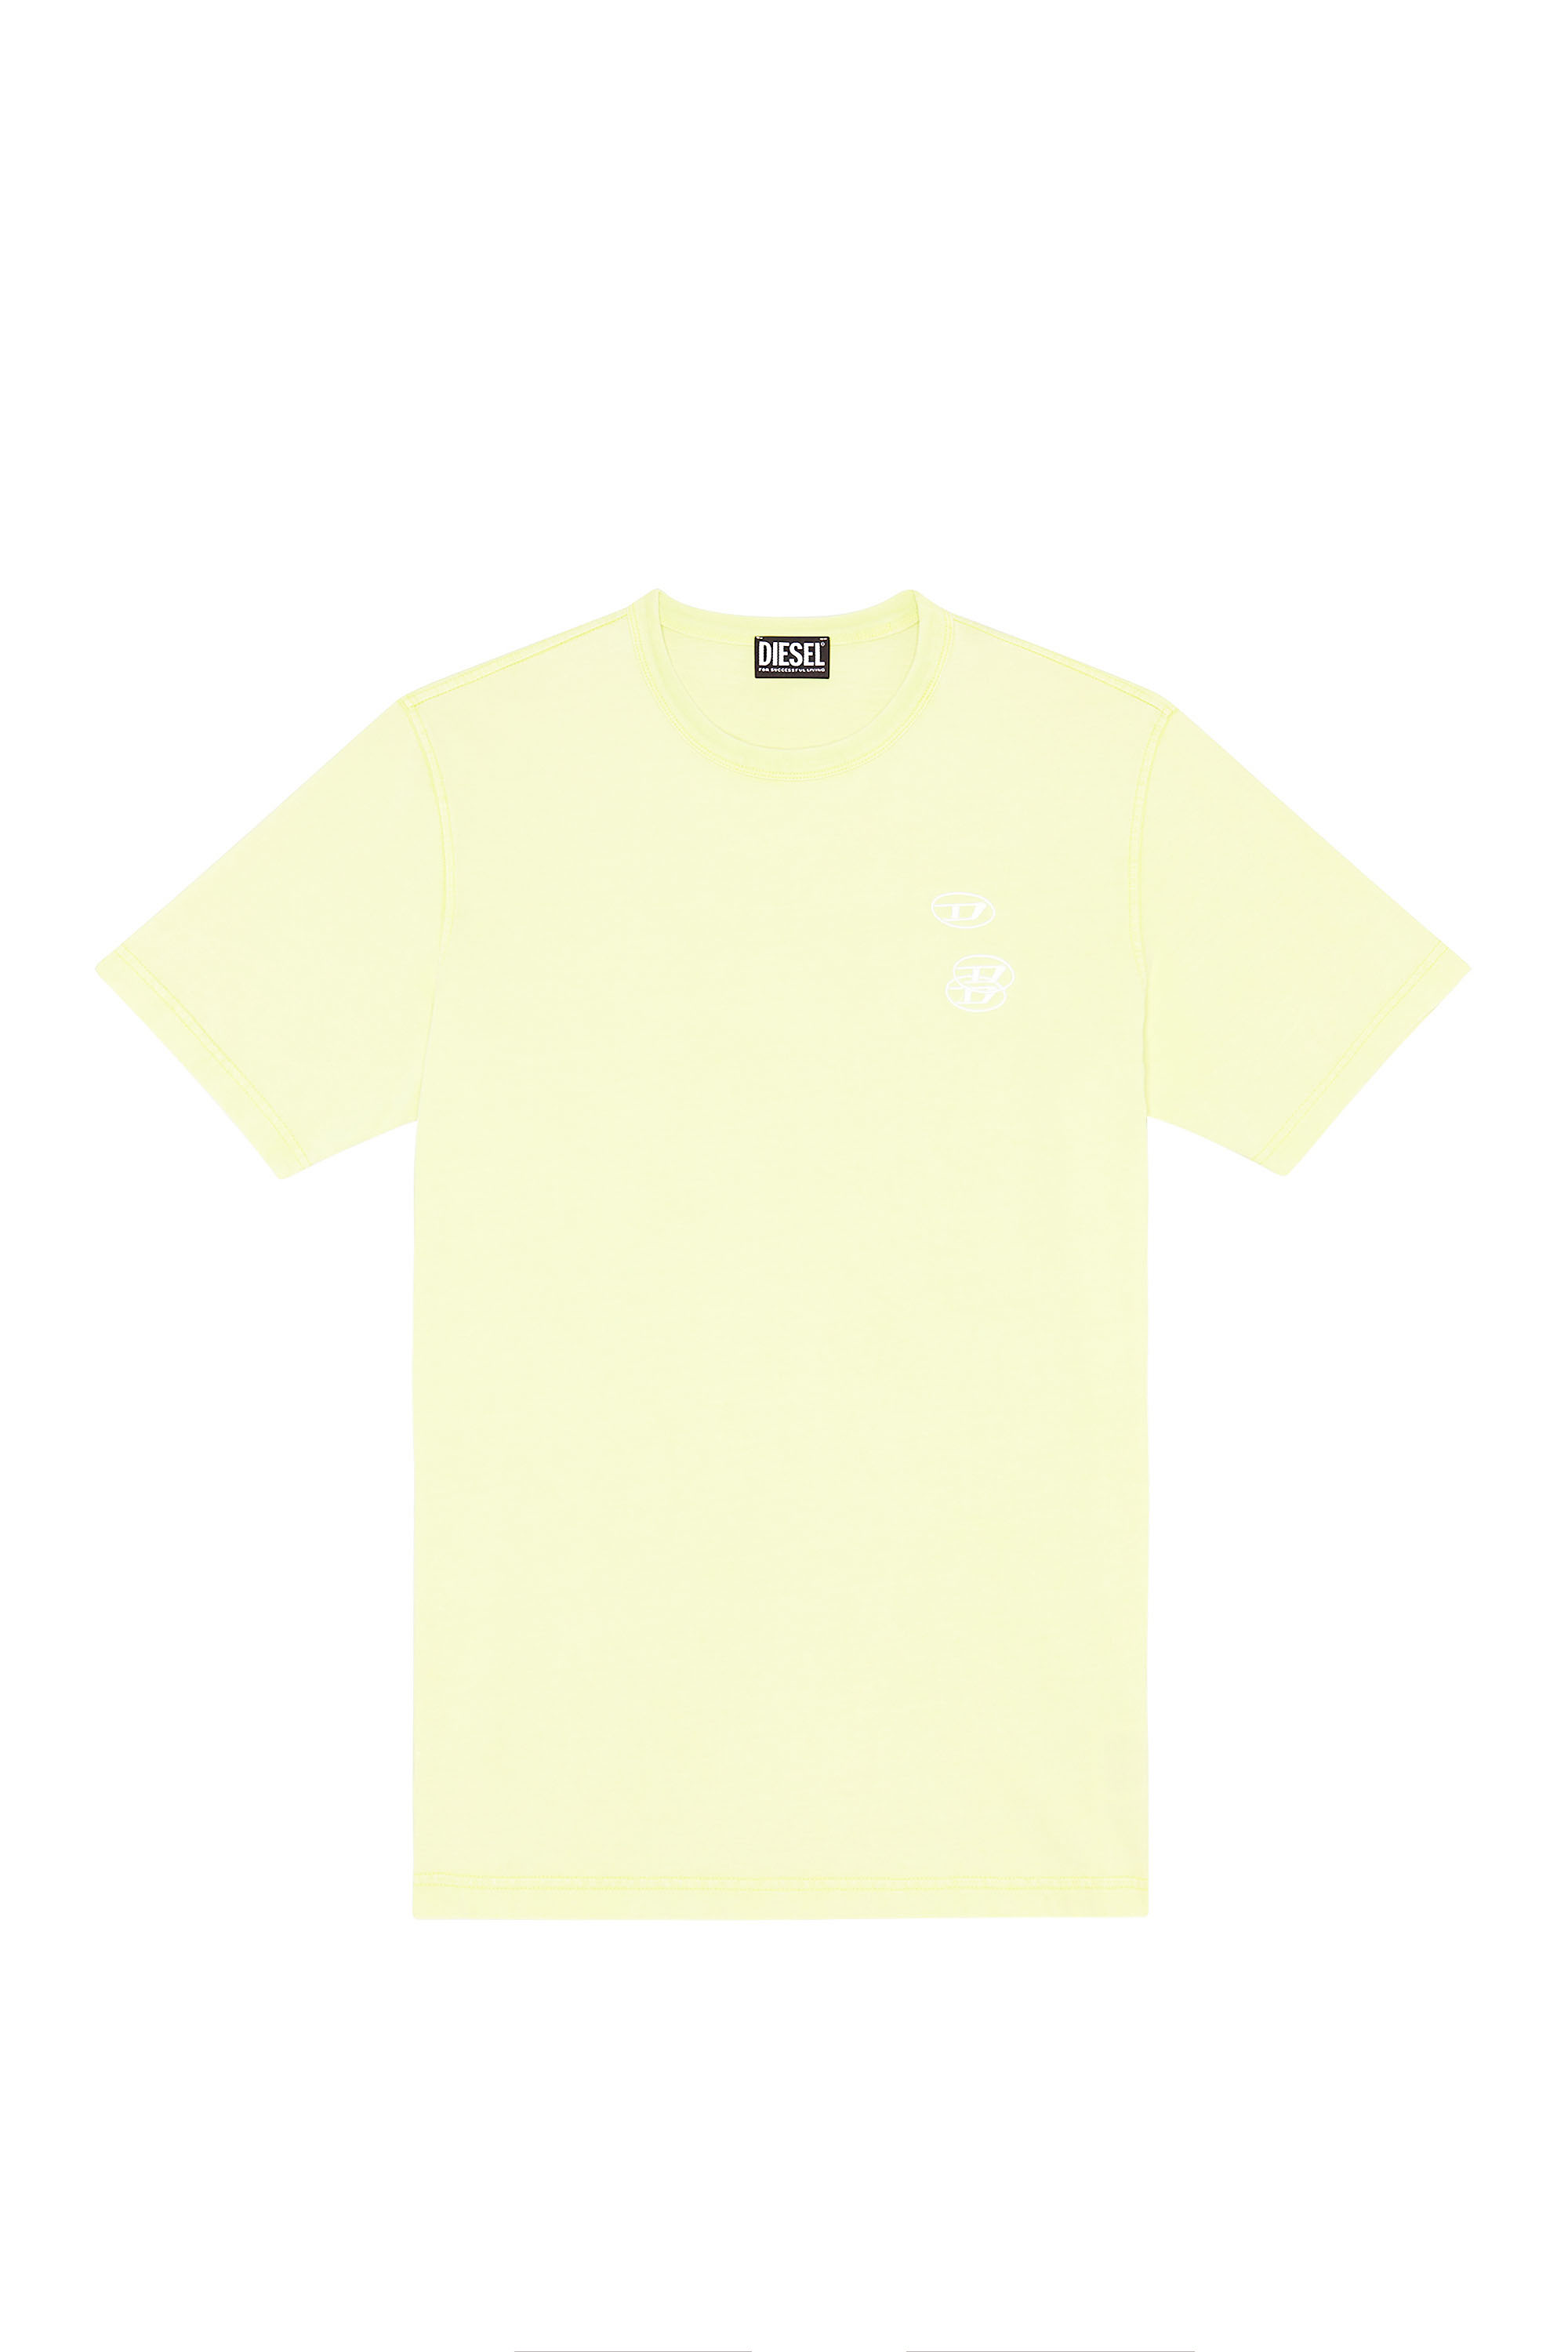 Diesel - T-JUST-G14, Yellow Fluo - Image 1